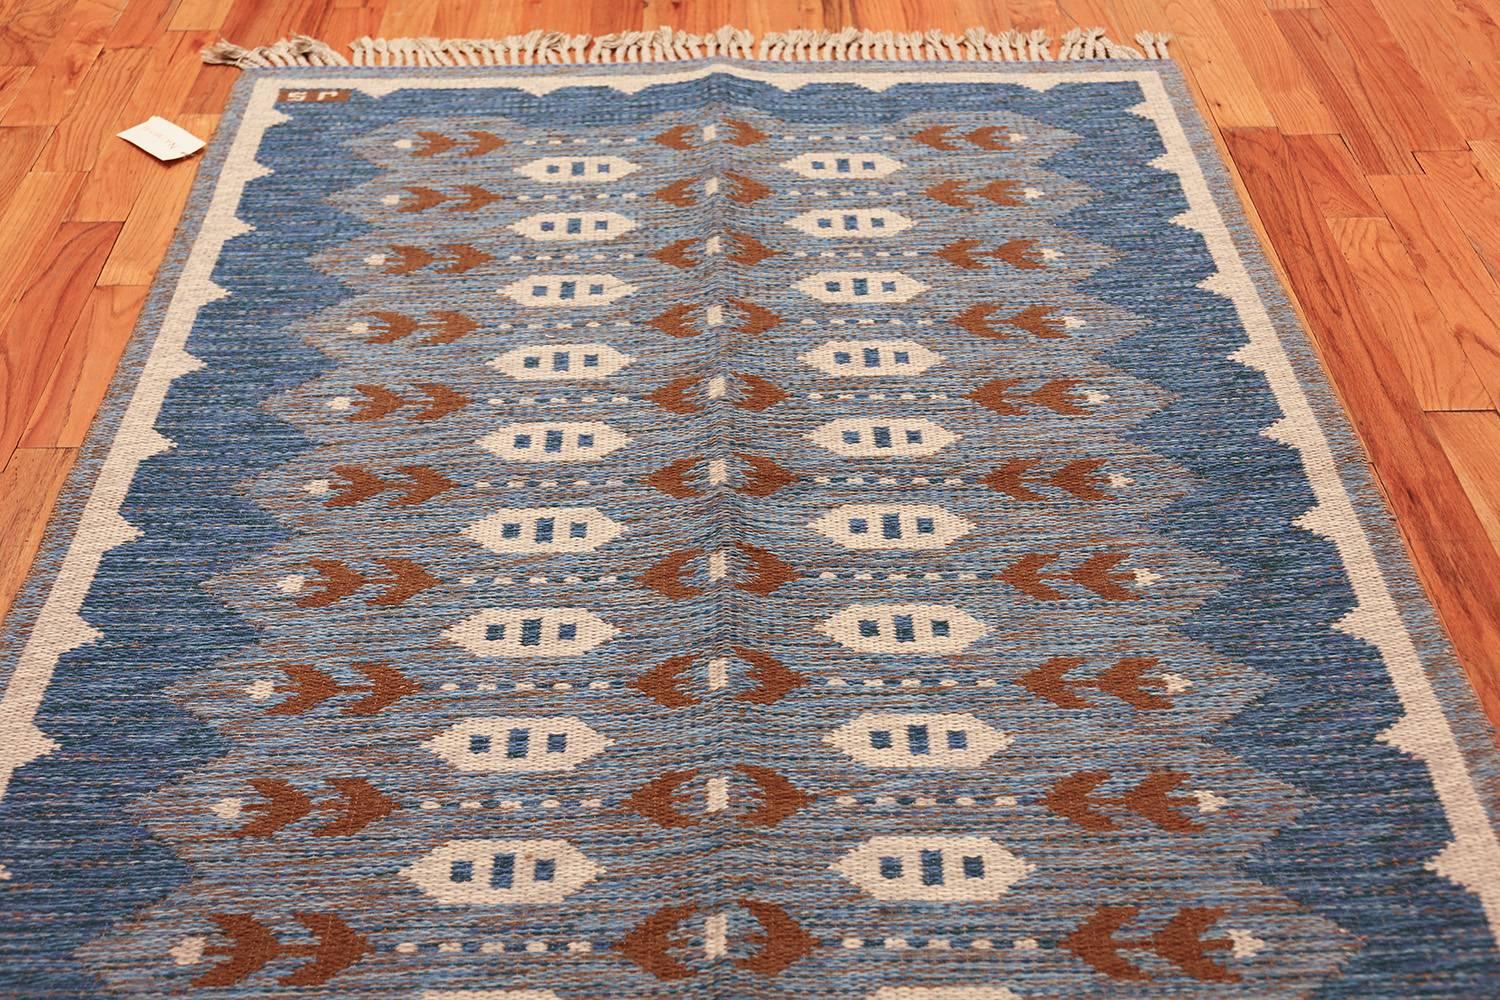 20th Century Vintage Swedish Double-Sided Rug. Size: 4 ft 8 in x 6 ft 3 in (1.42 m x 1.9 m)